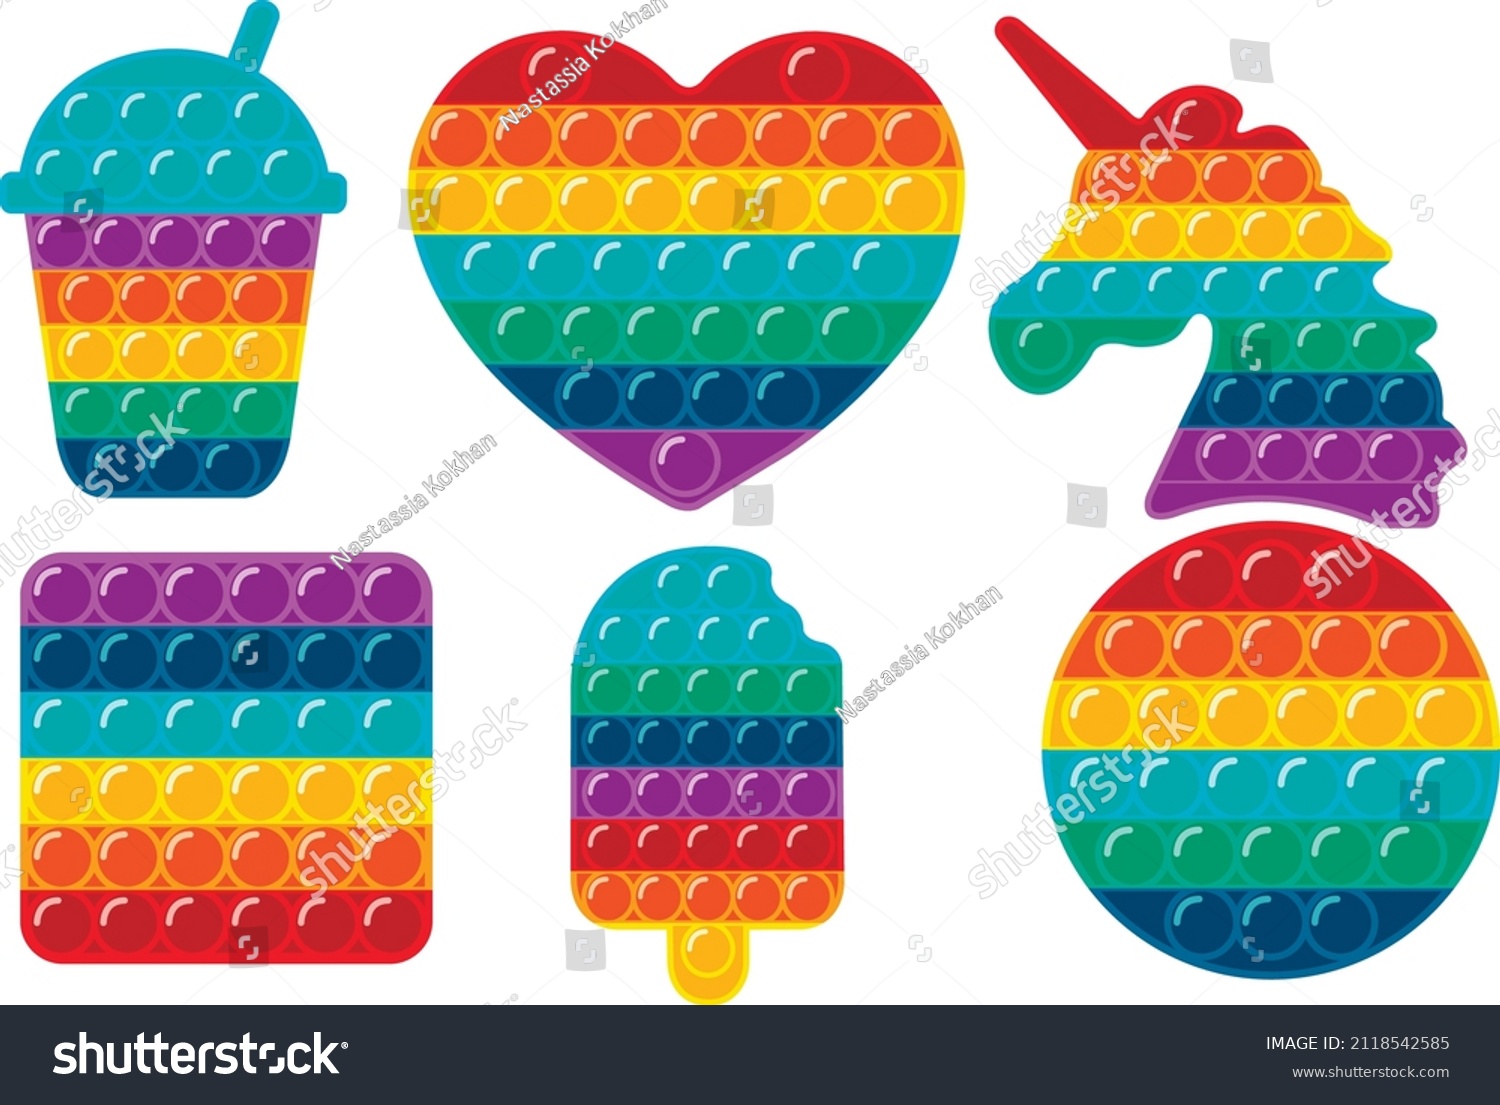 SVG of pop it svg vector Illustration isolated on white background. circle svg cup pop it heart ice cream svg square unicorn svg for child, funny vector graphics, banner and gift design svg